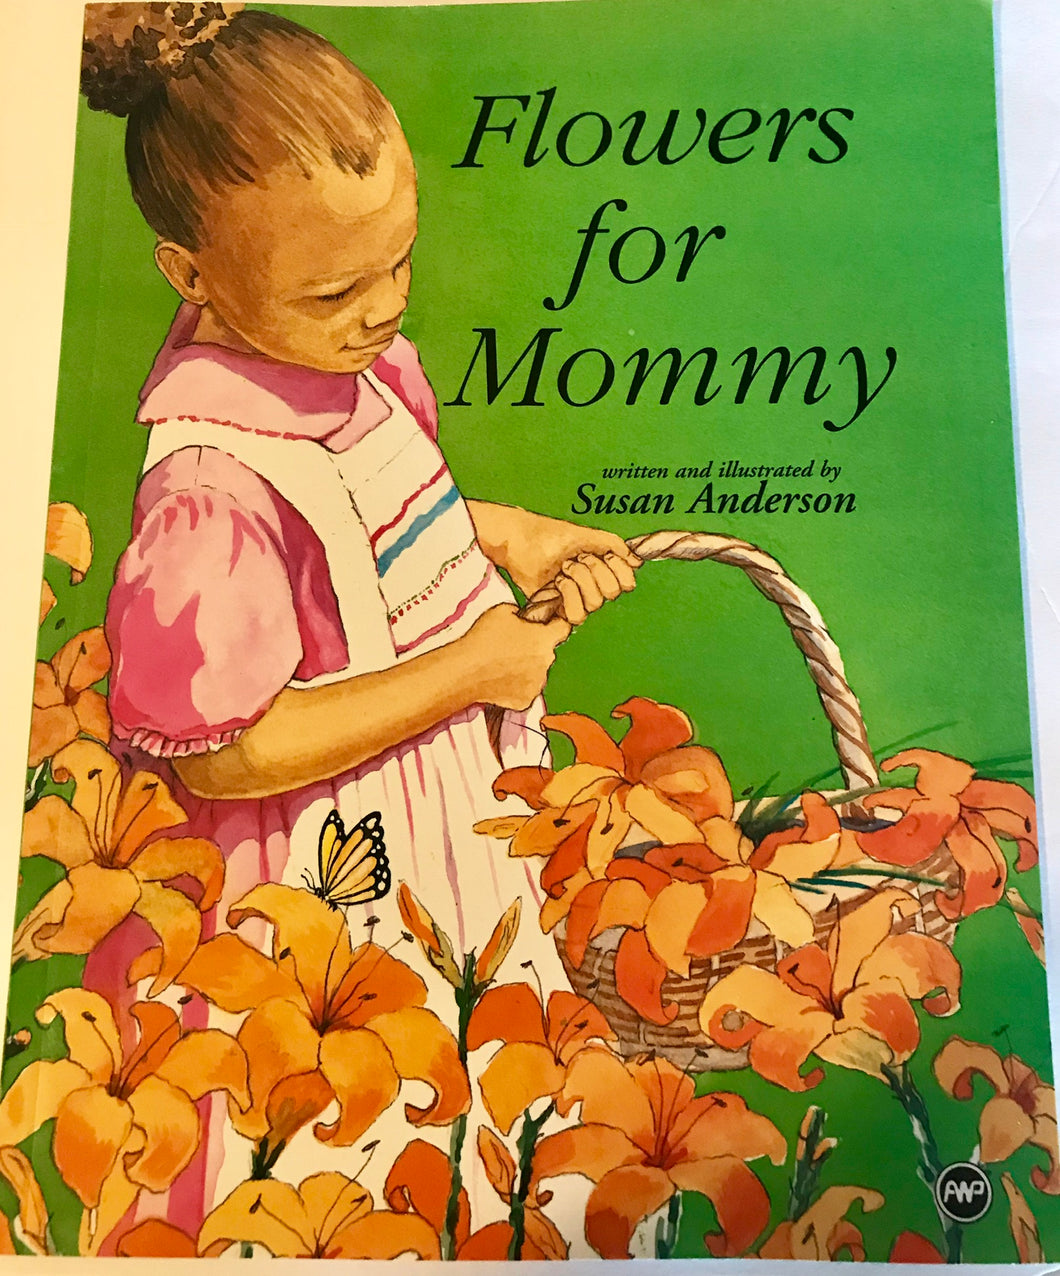 Flowers For Mommy by Susan Anderson